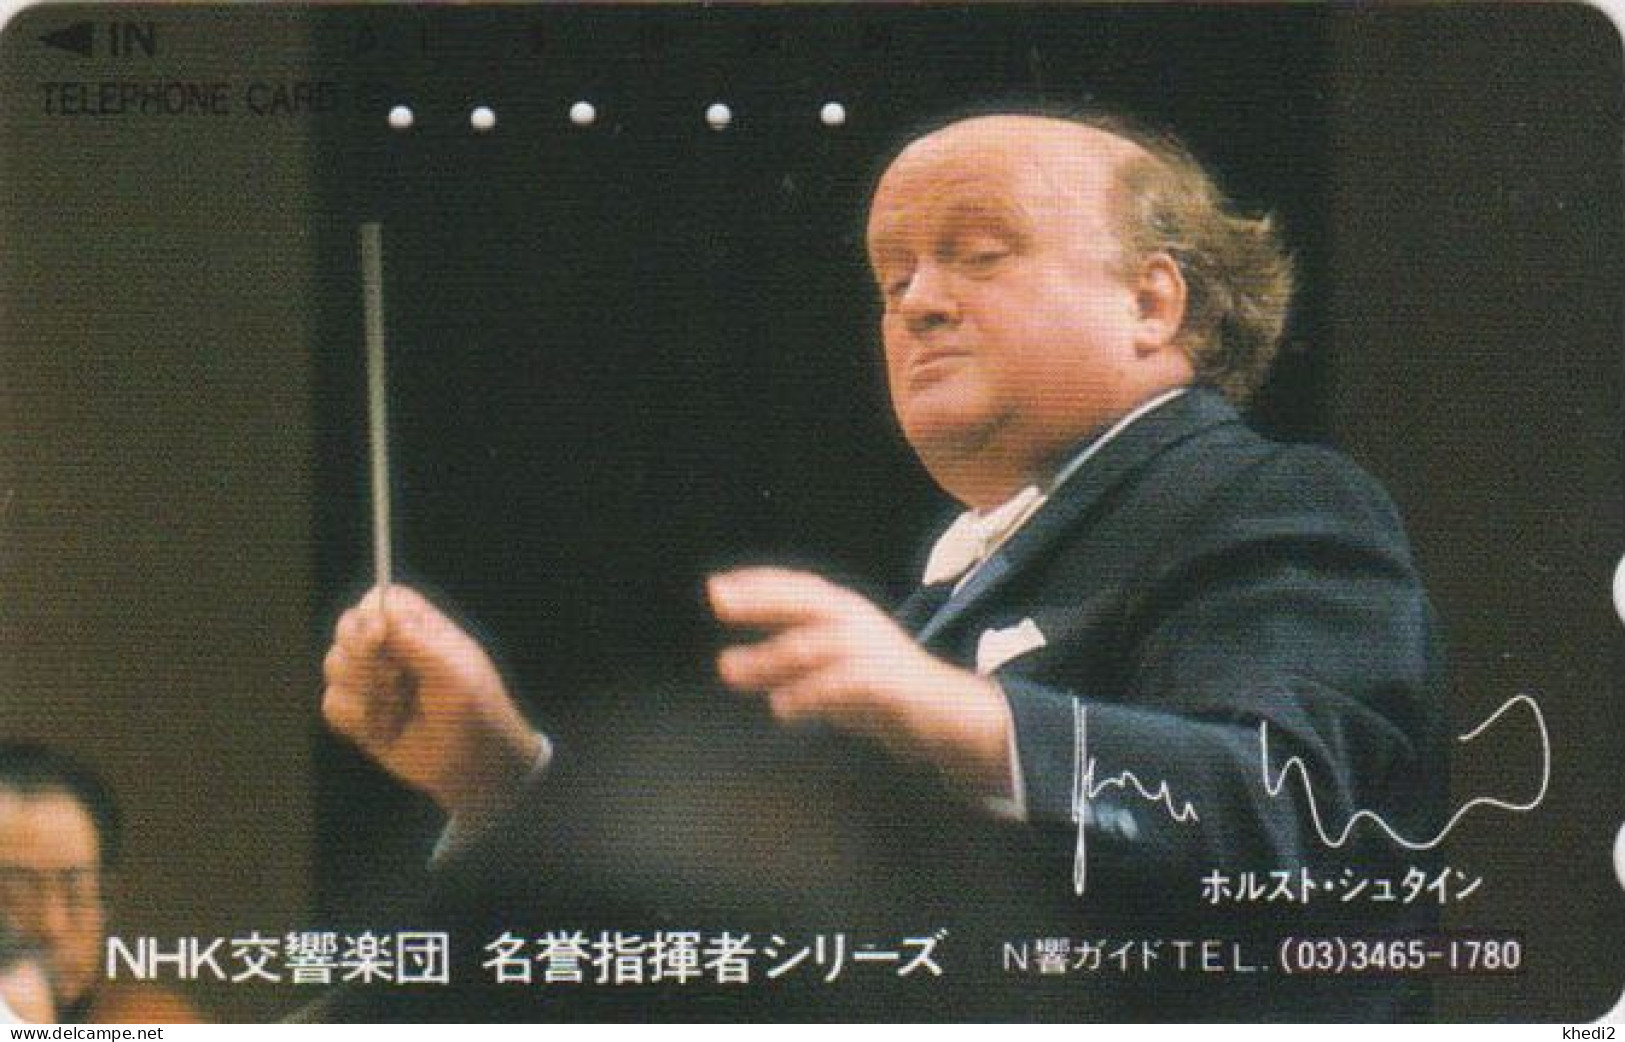 TC JAPON / 110-31444 - Musique RADIO NHK - Chef D'orchestre HORST STEIN / GERMANY - MUSIC JAPAN Free Phonecard - Musik